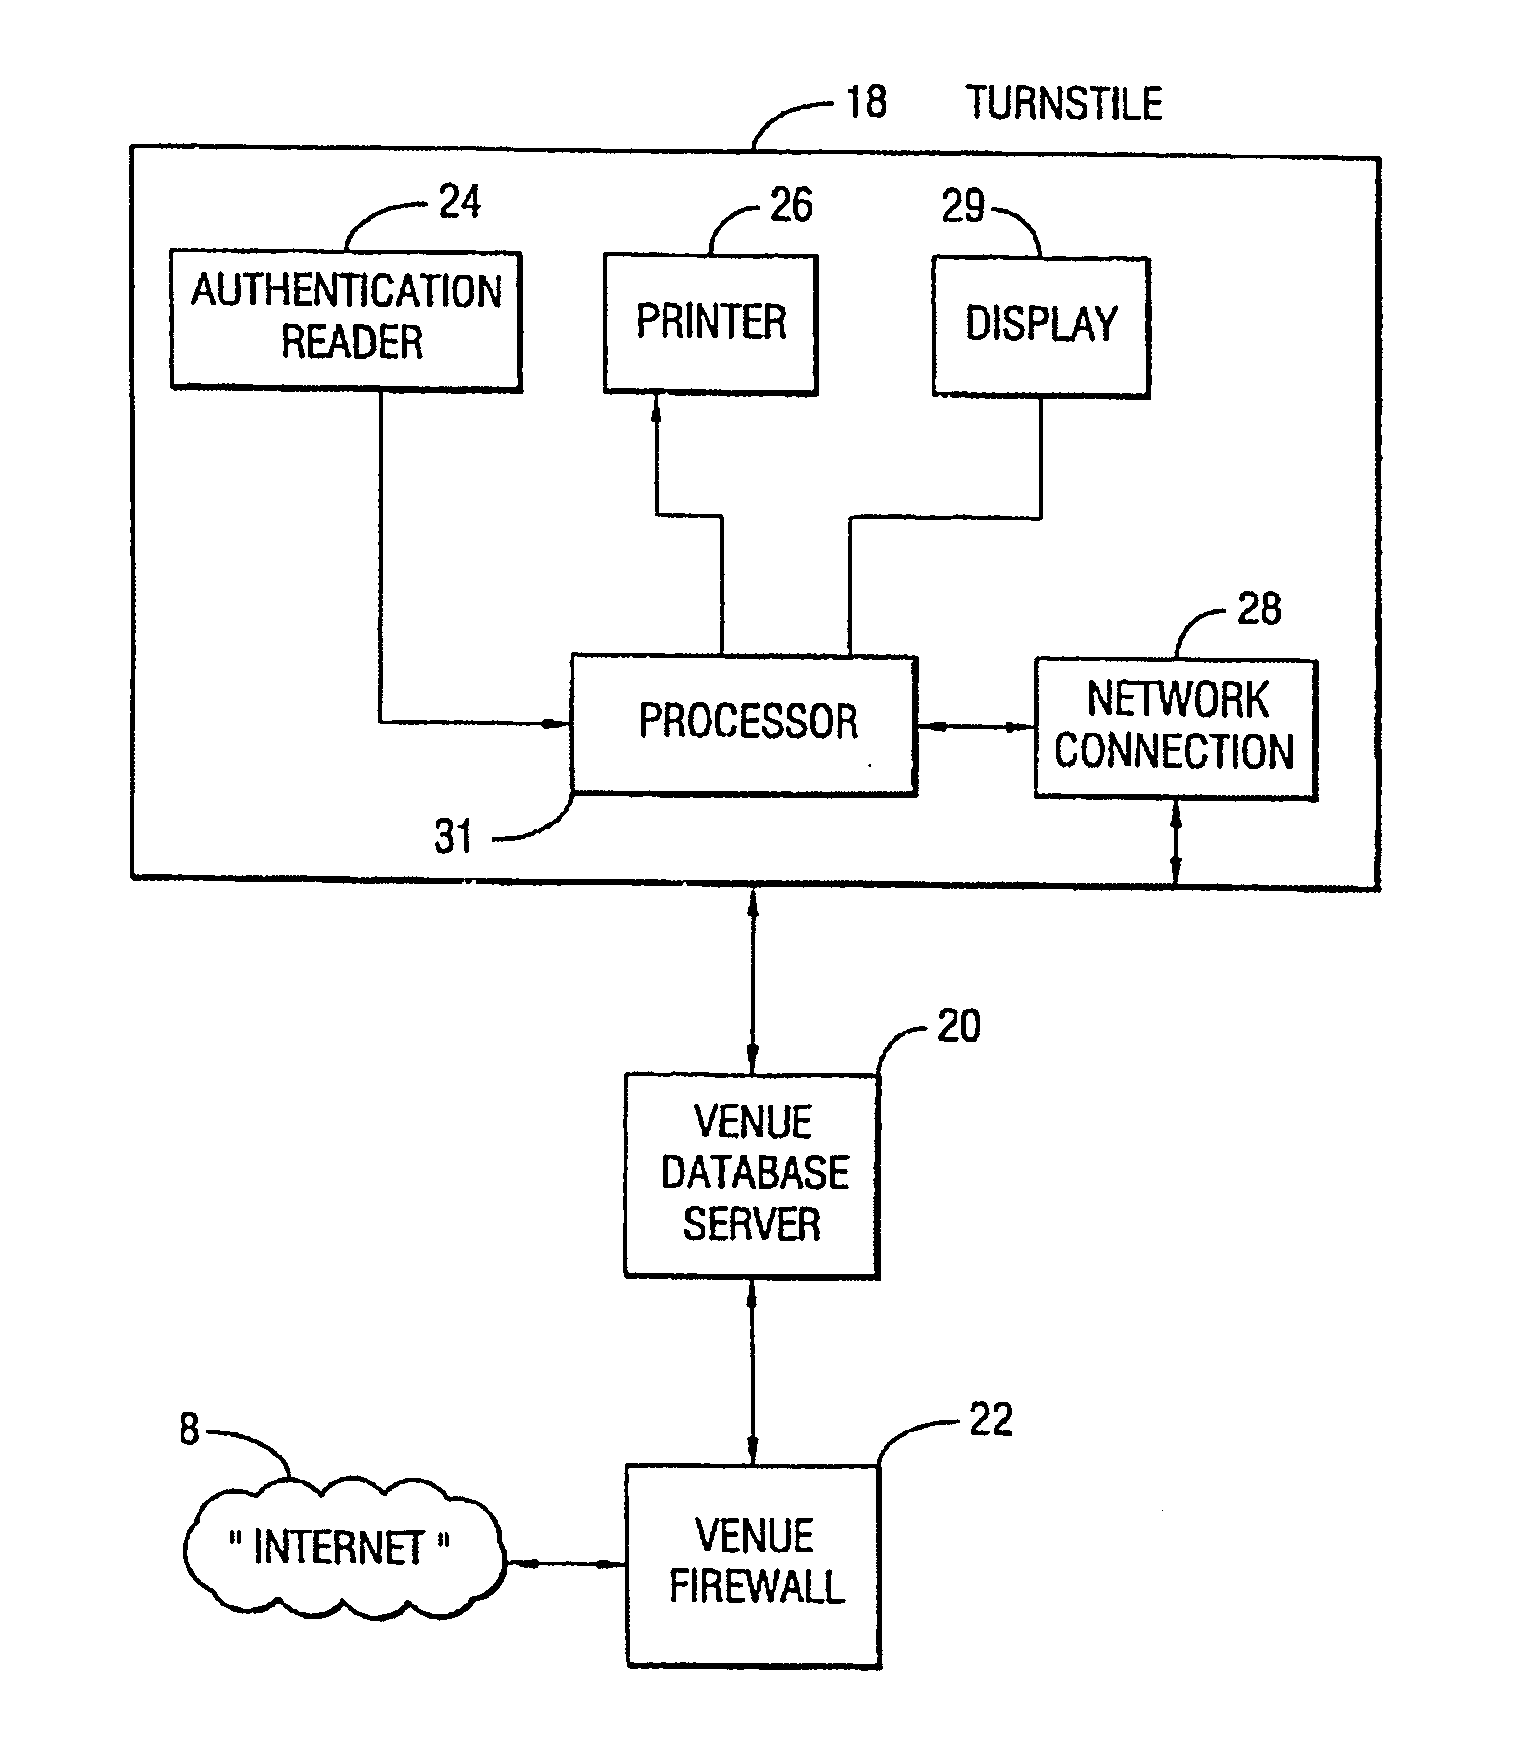 Multi-input access device and method of using the same